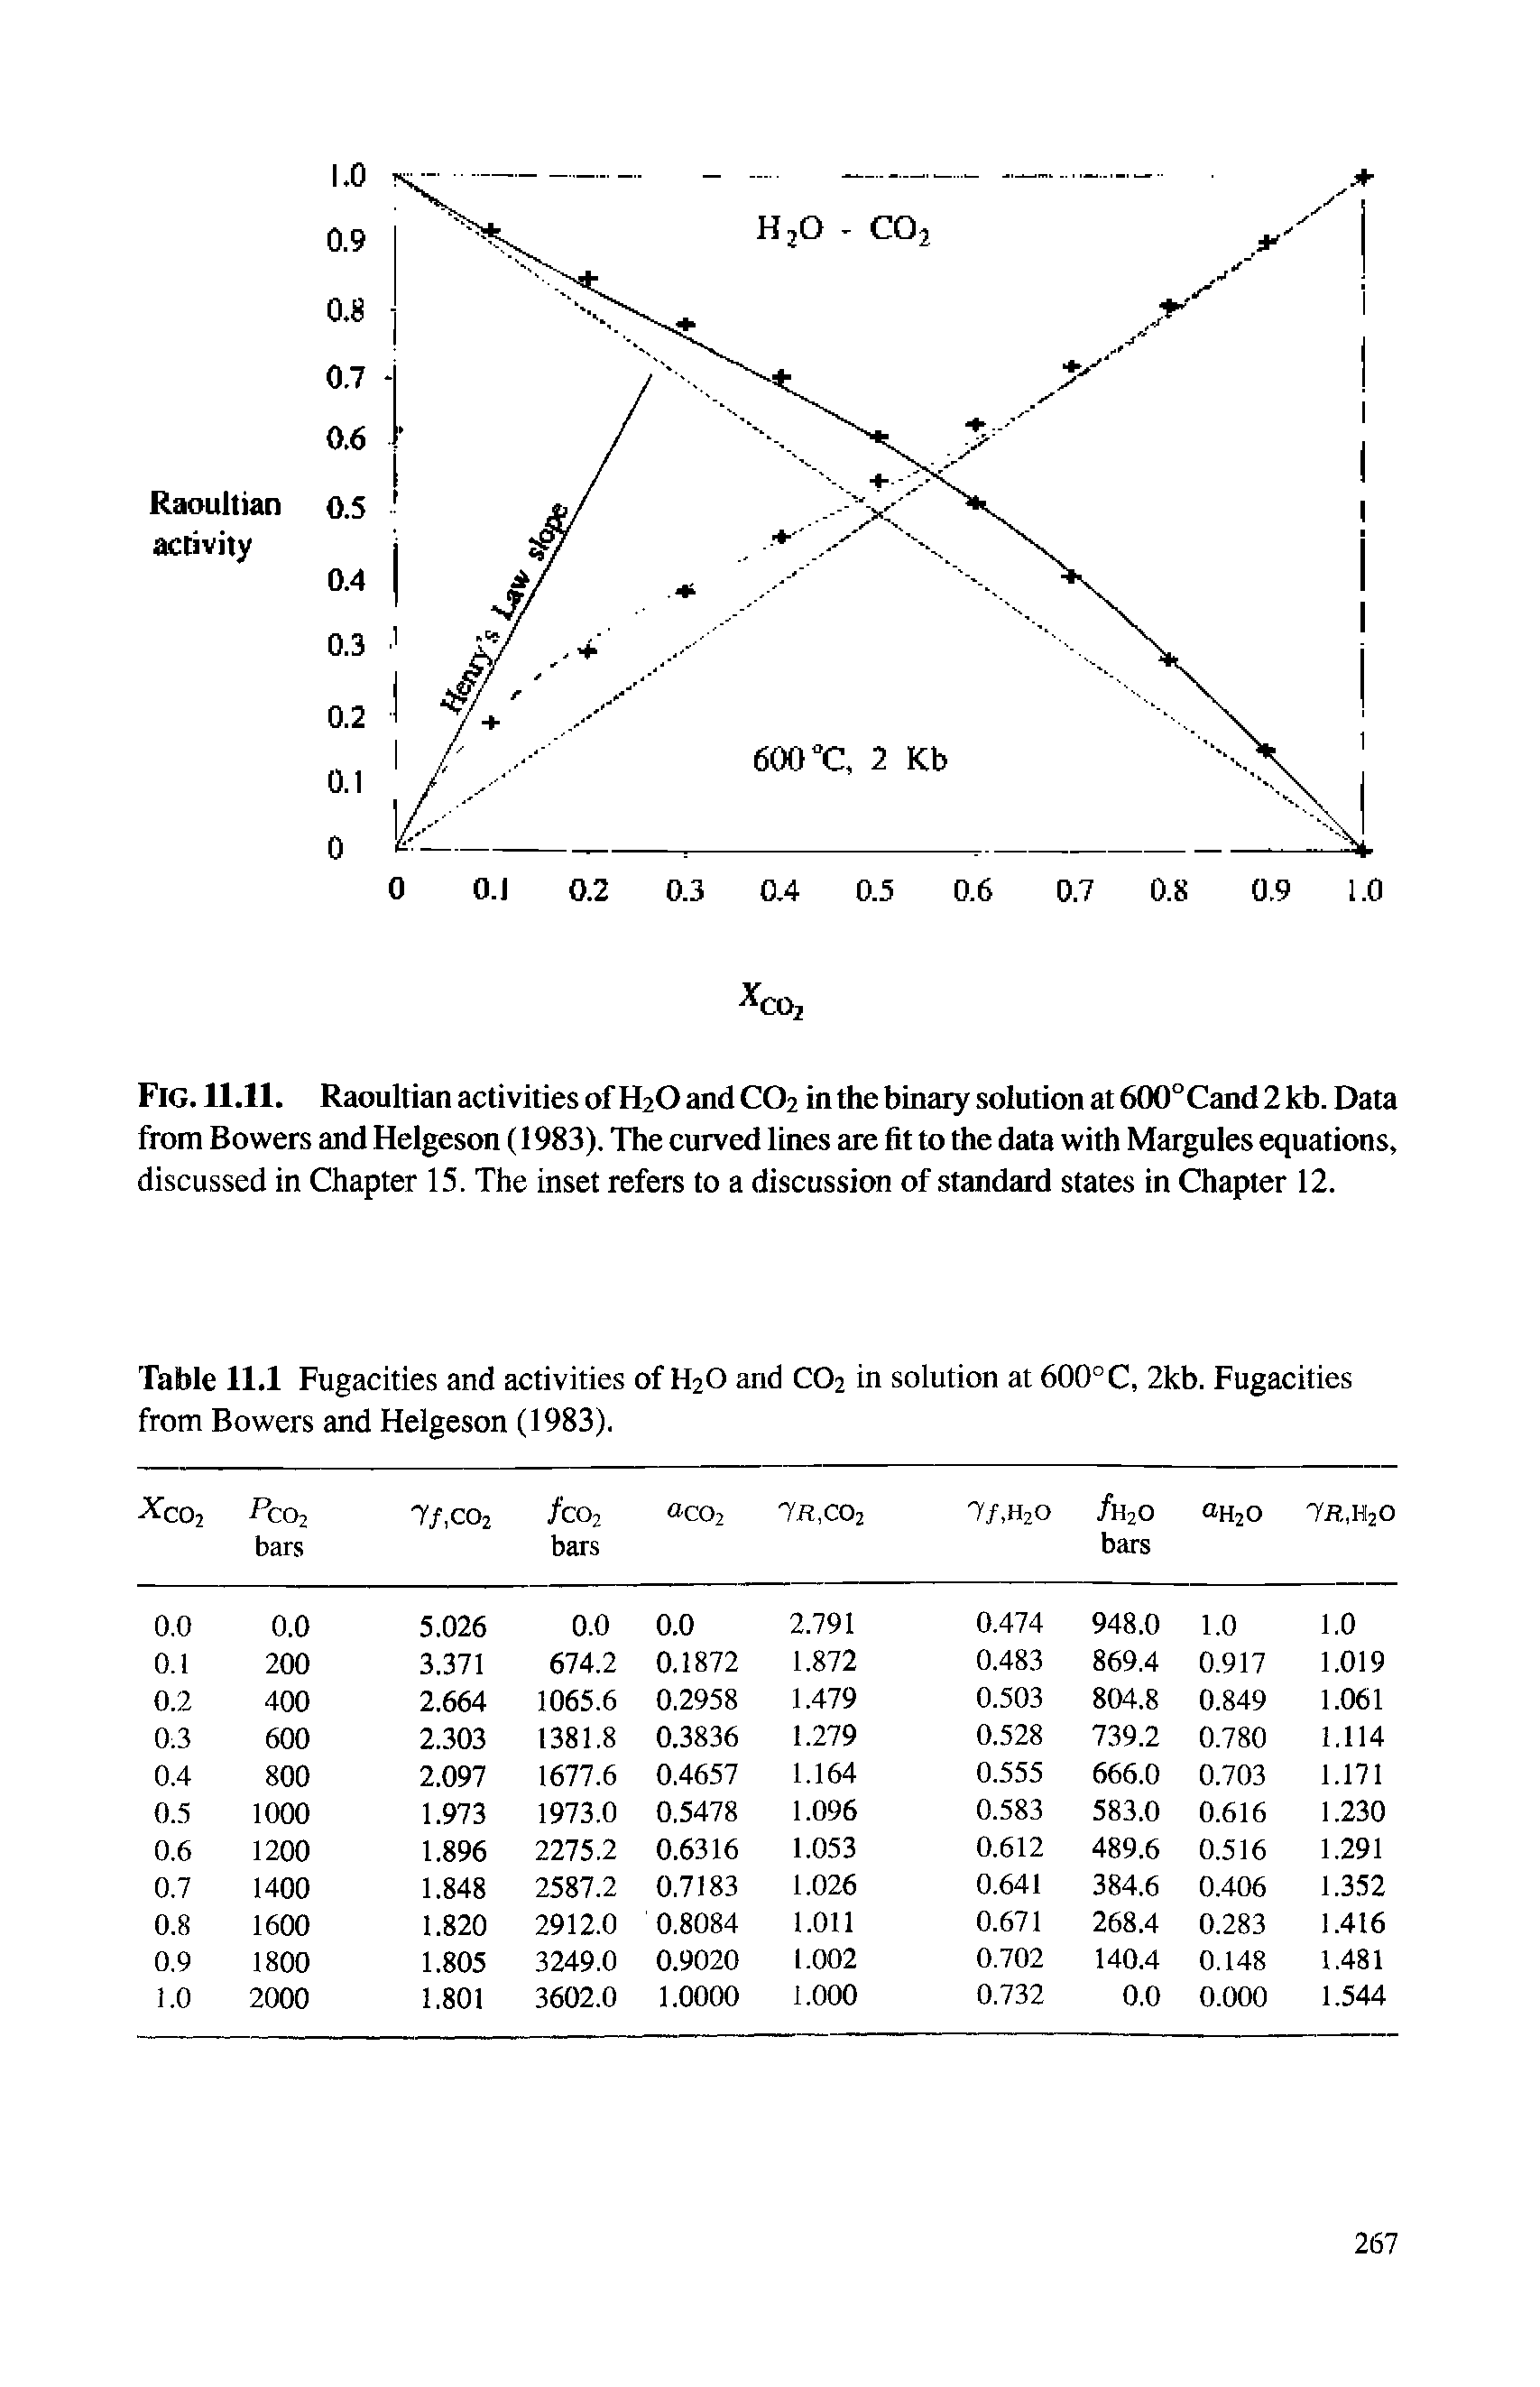 Fig. 11.11. Raoultian activities of H2O and CO2 in the binary solution at 600°Cand 2 kb. Data from Bowers and Helgeson (1983). The curved lines are fit to the data with Margules equations, discussed in Chapter 15. The inset refers to a discussion of standard states in Chapter 12.